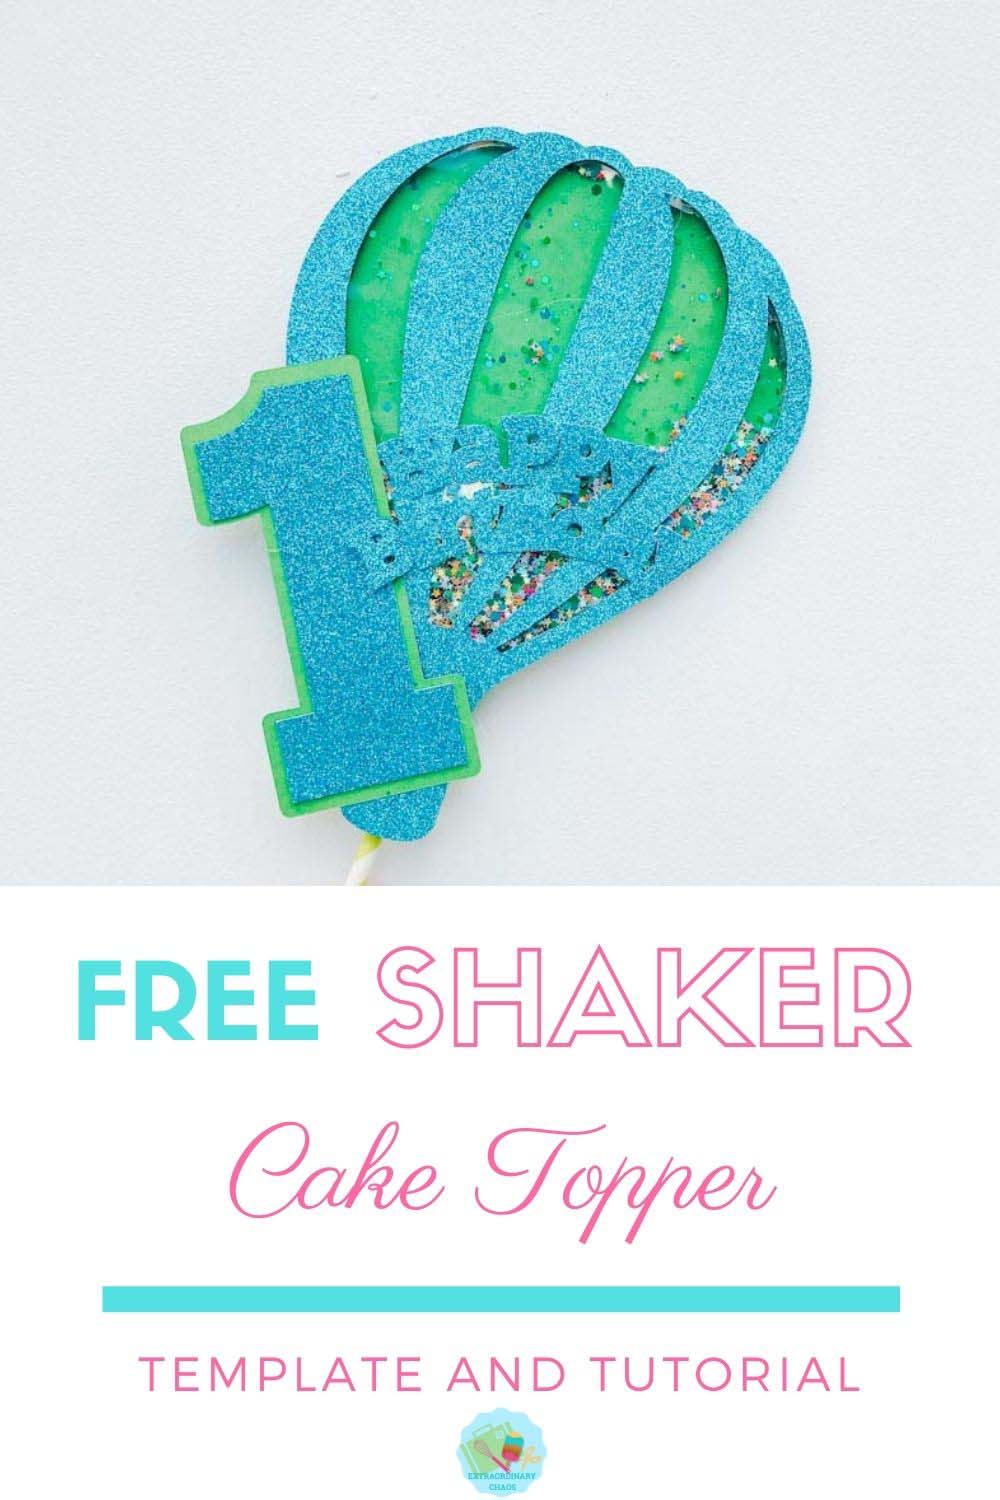 A Free Shaker cake topper template and tutorial Cricut Maker